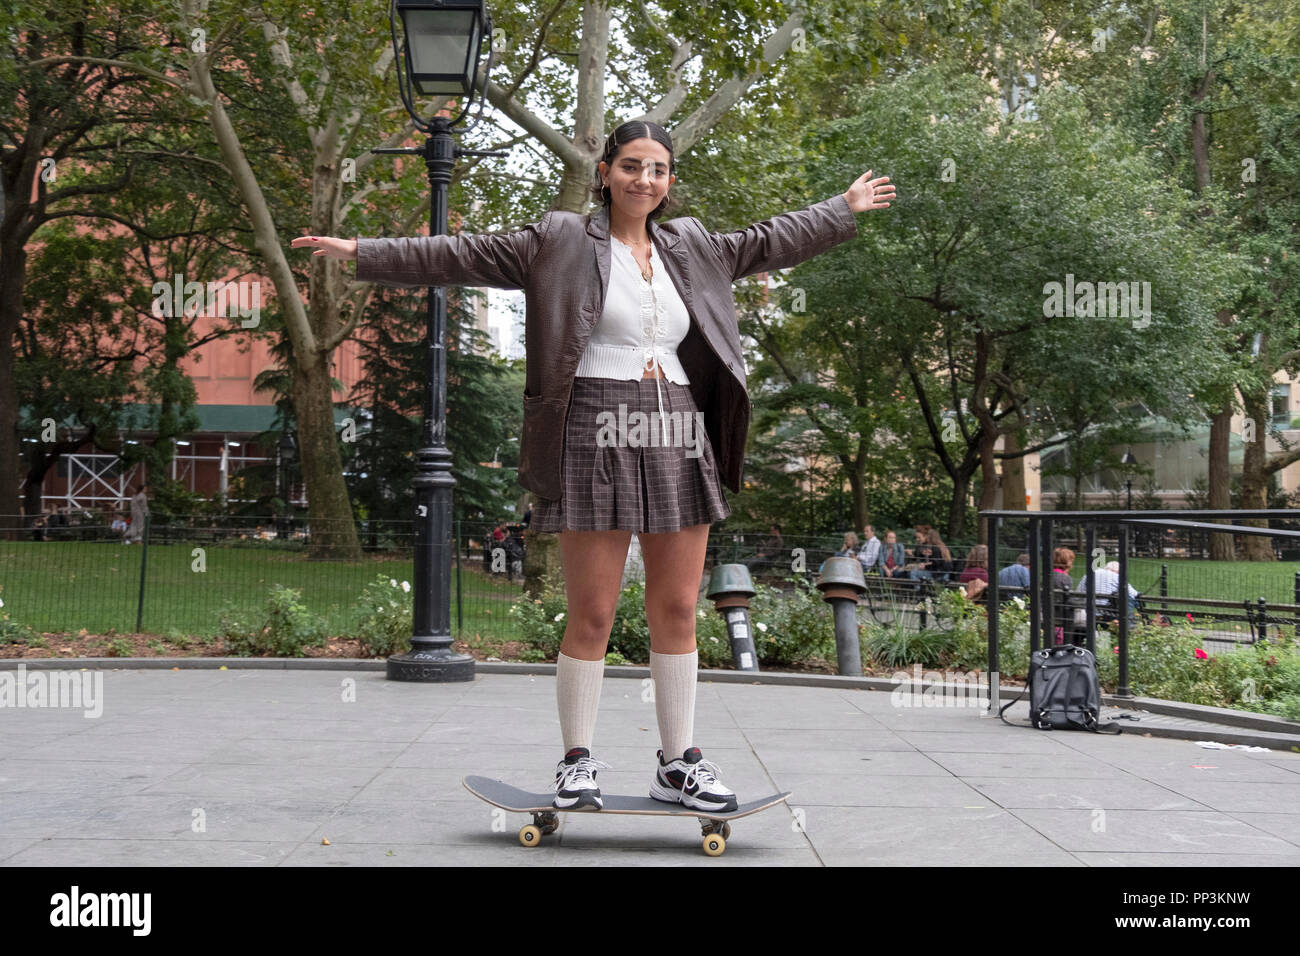 Photo of an attractive young lady riding on a skateboard in Washington Square Park in New York City. Stock Photo